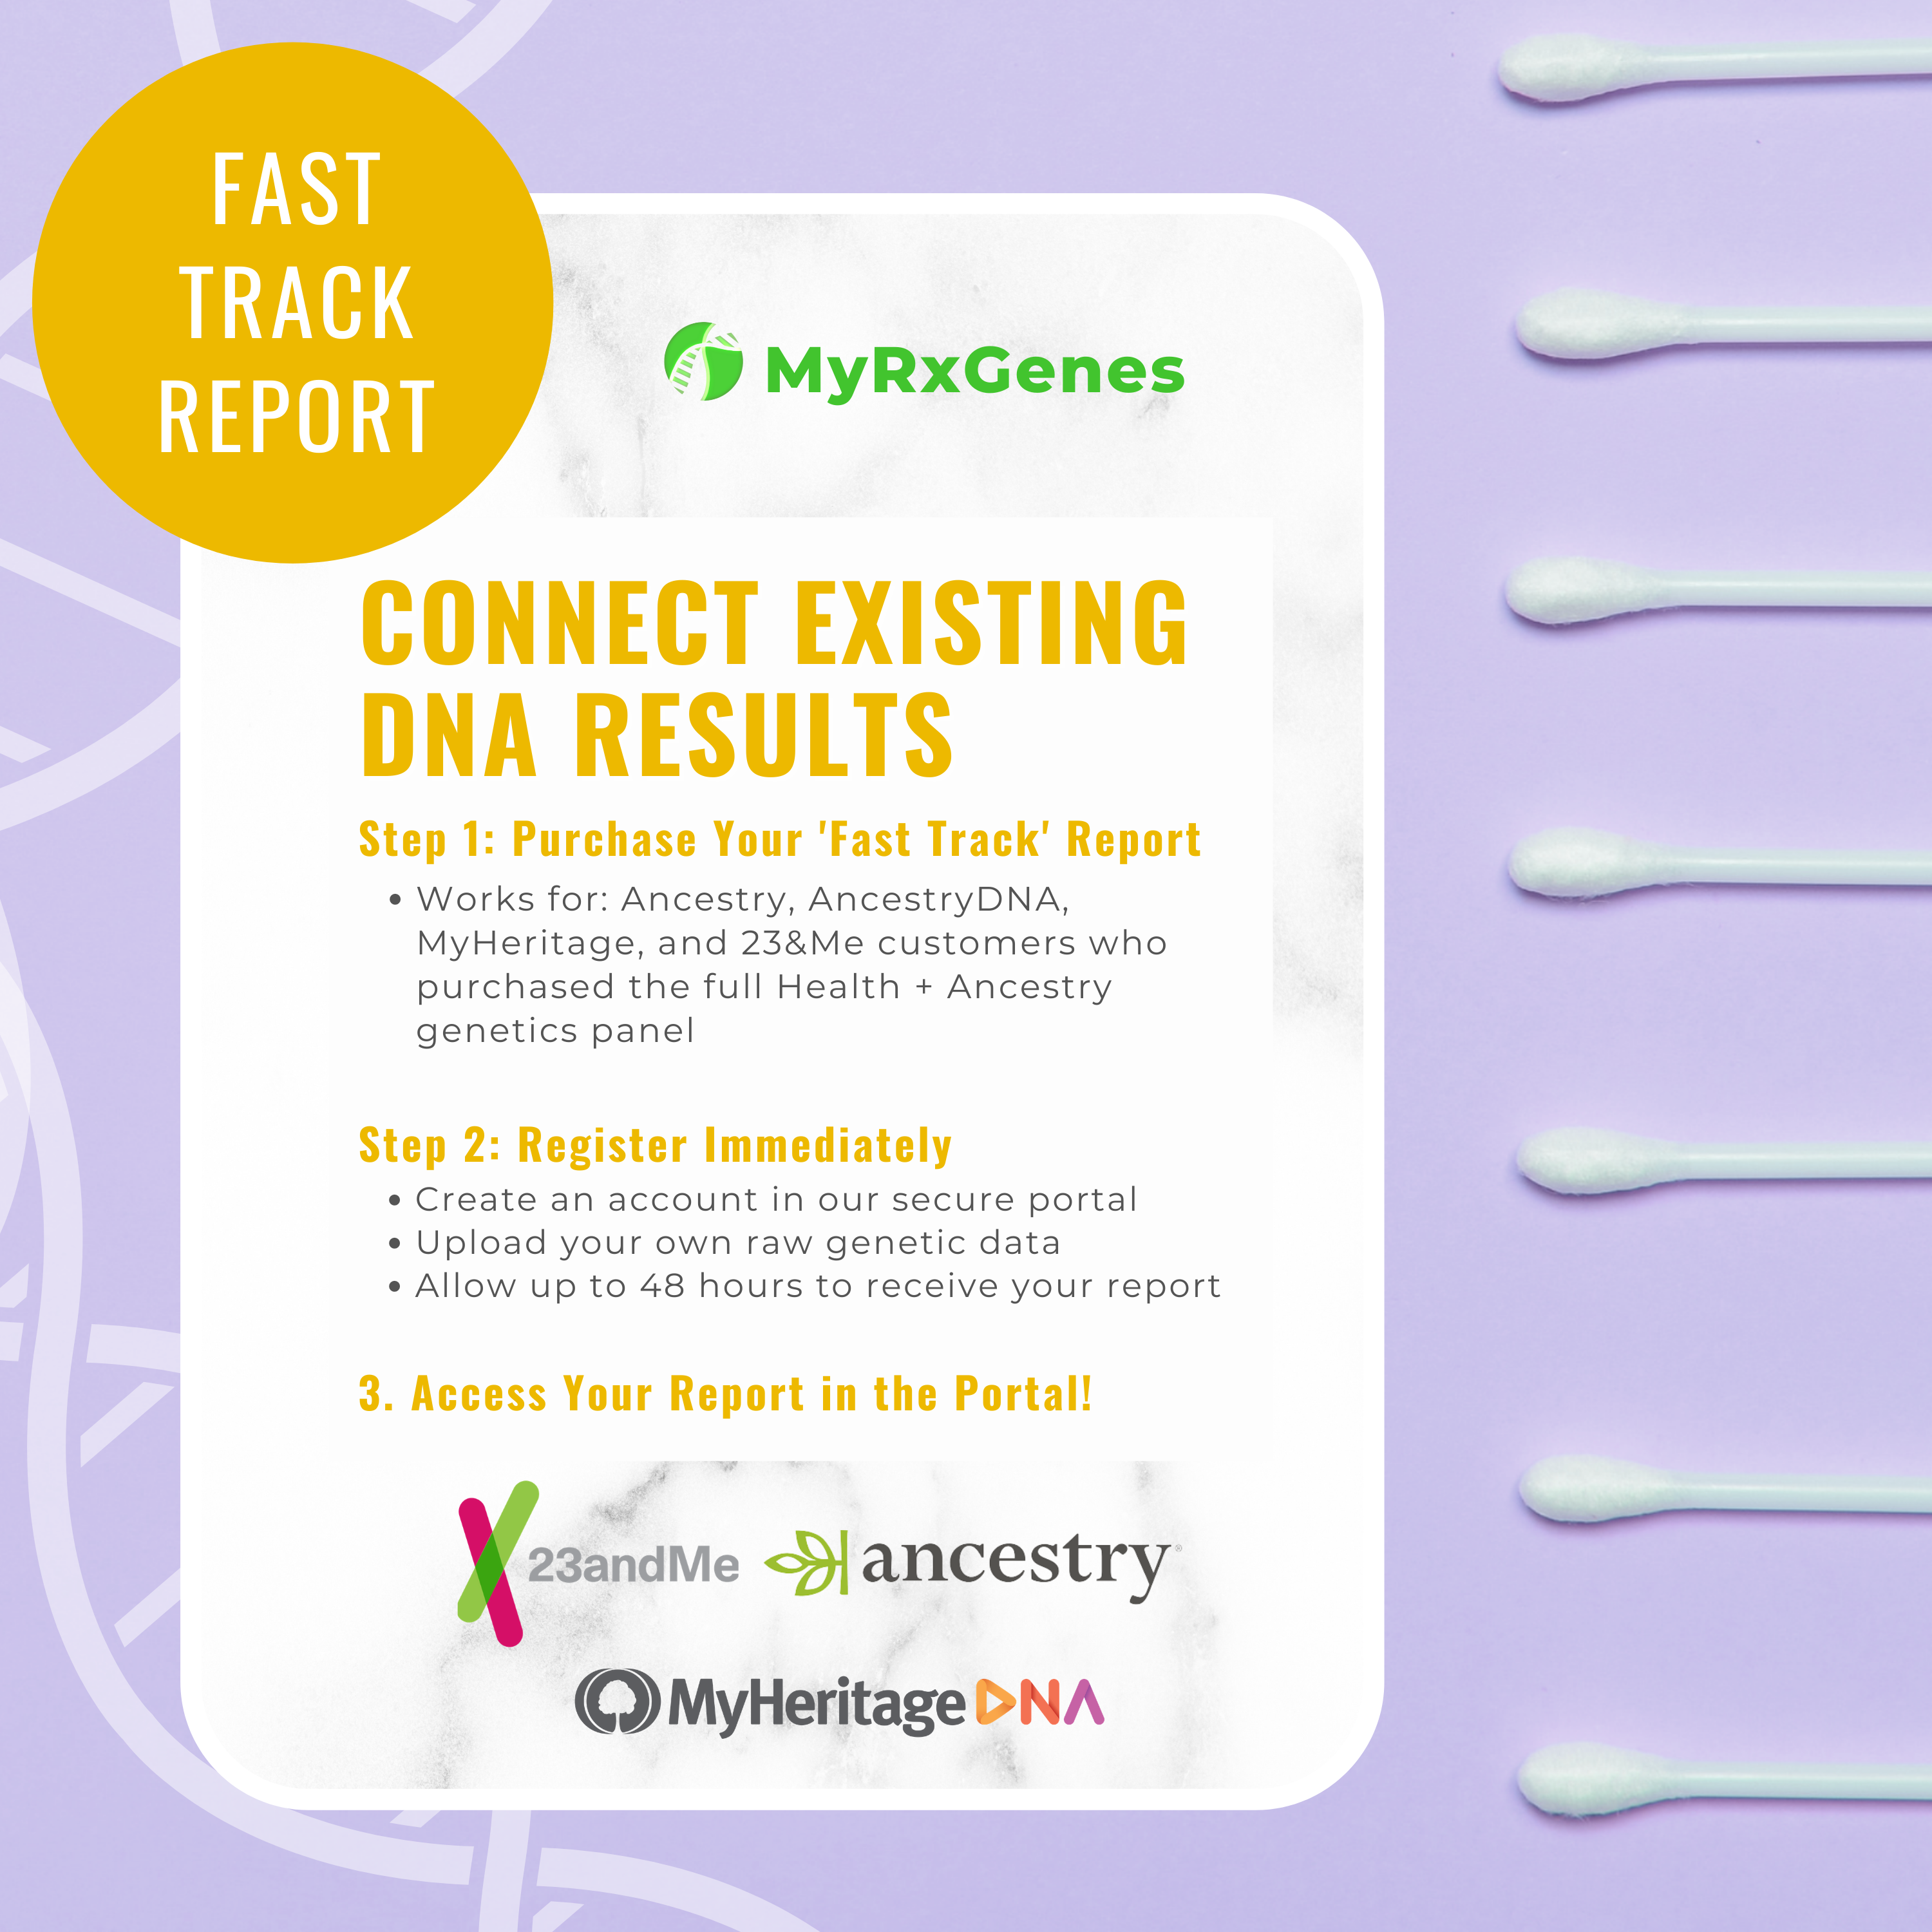 Fast Track Reports: Connect Existing 23&Me, AncestryDNA, + MyHeritage DNA